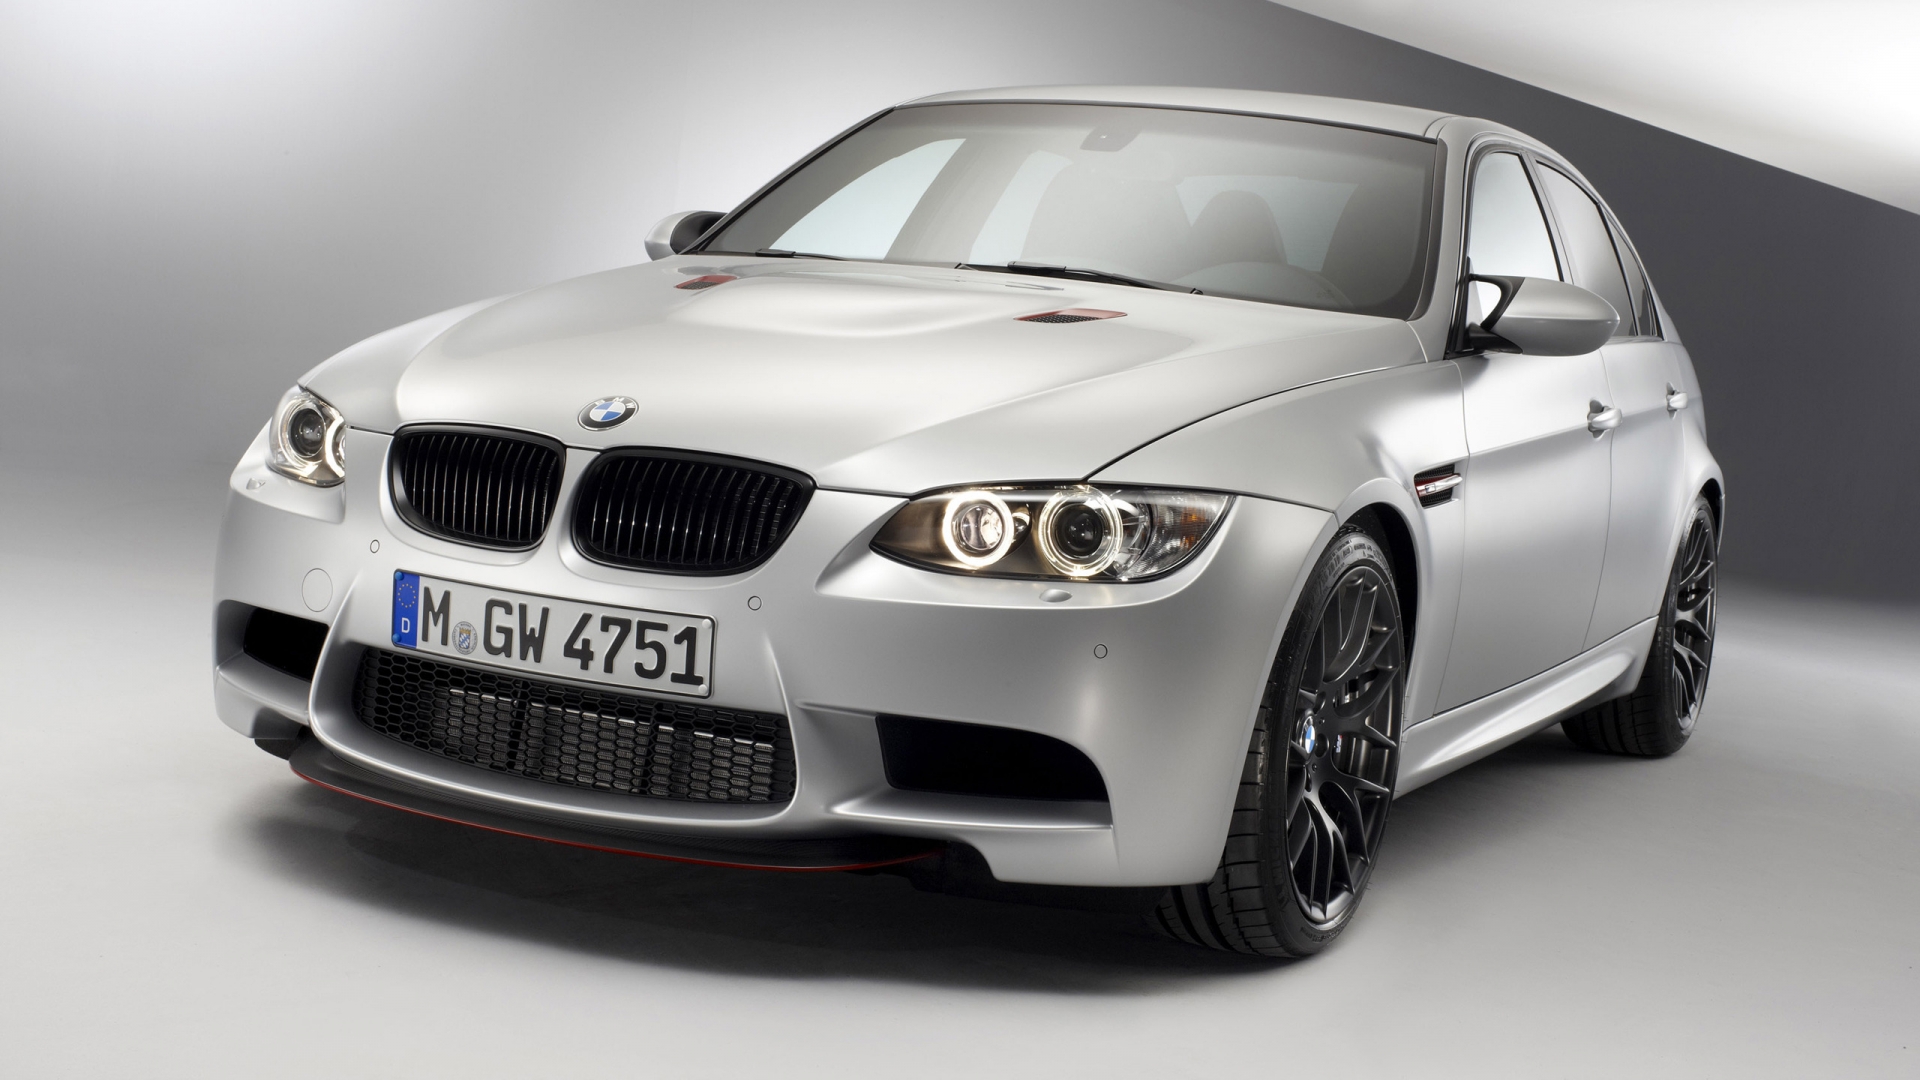 BMW M3 E90 CRT Front for 1920 x 1080 HDTV 1080p resolution